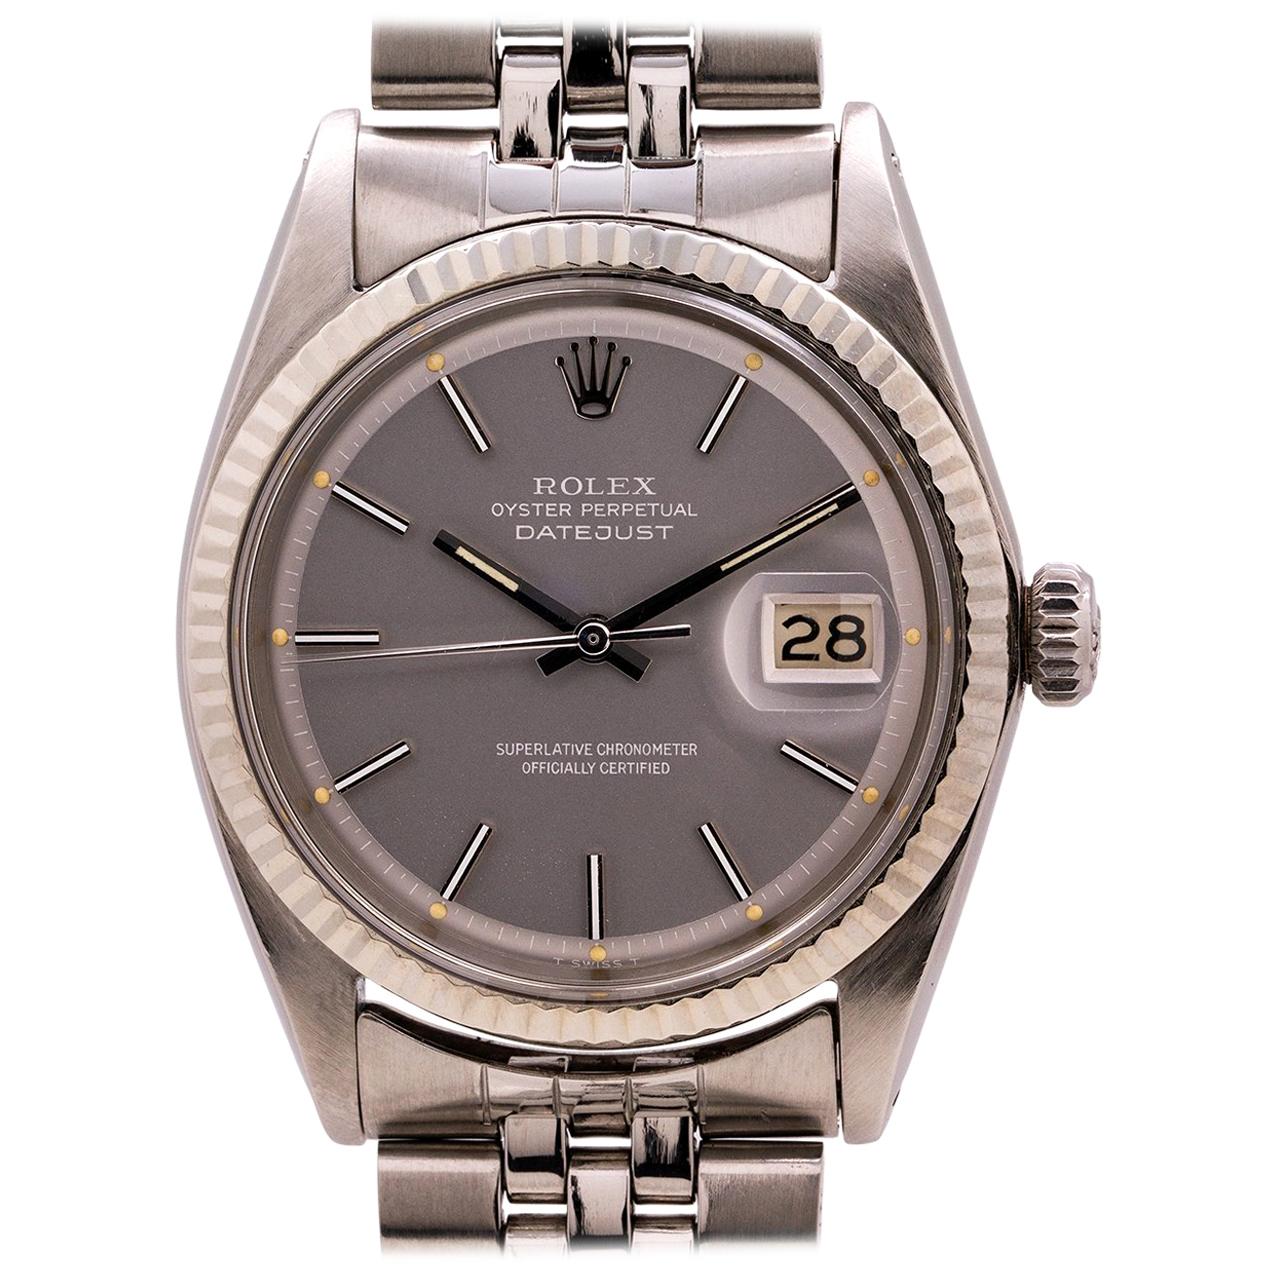 Rolex Datejust Ref 1601 Stainless Steel and 14 Karat Gray Pie Pan Dial For Sale